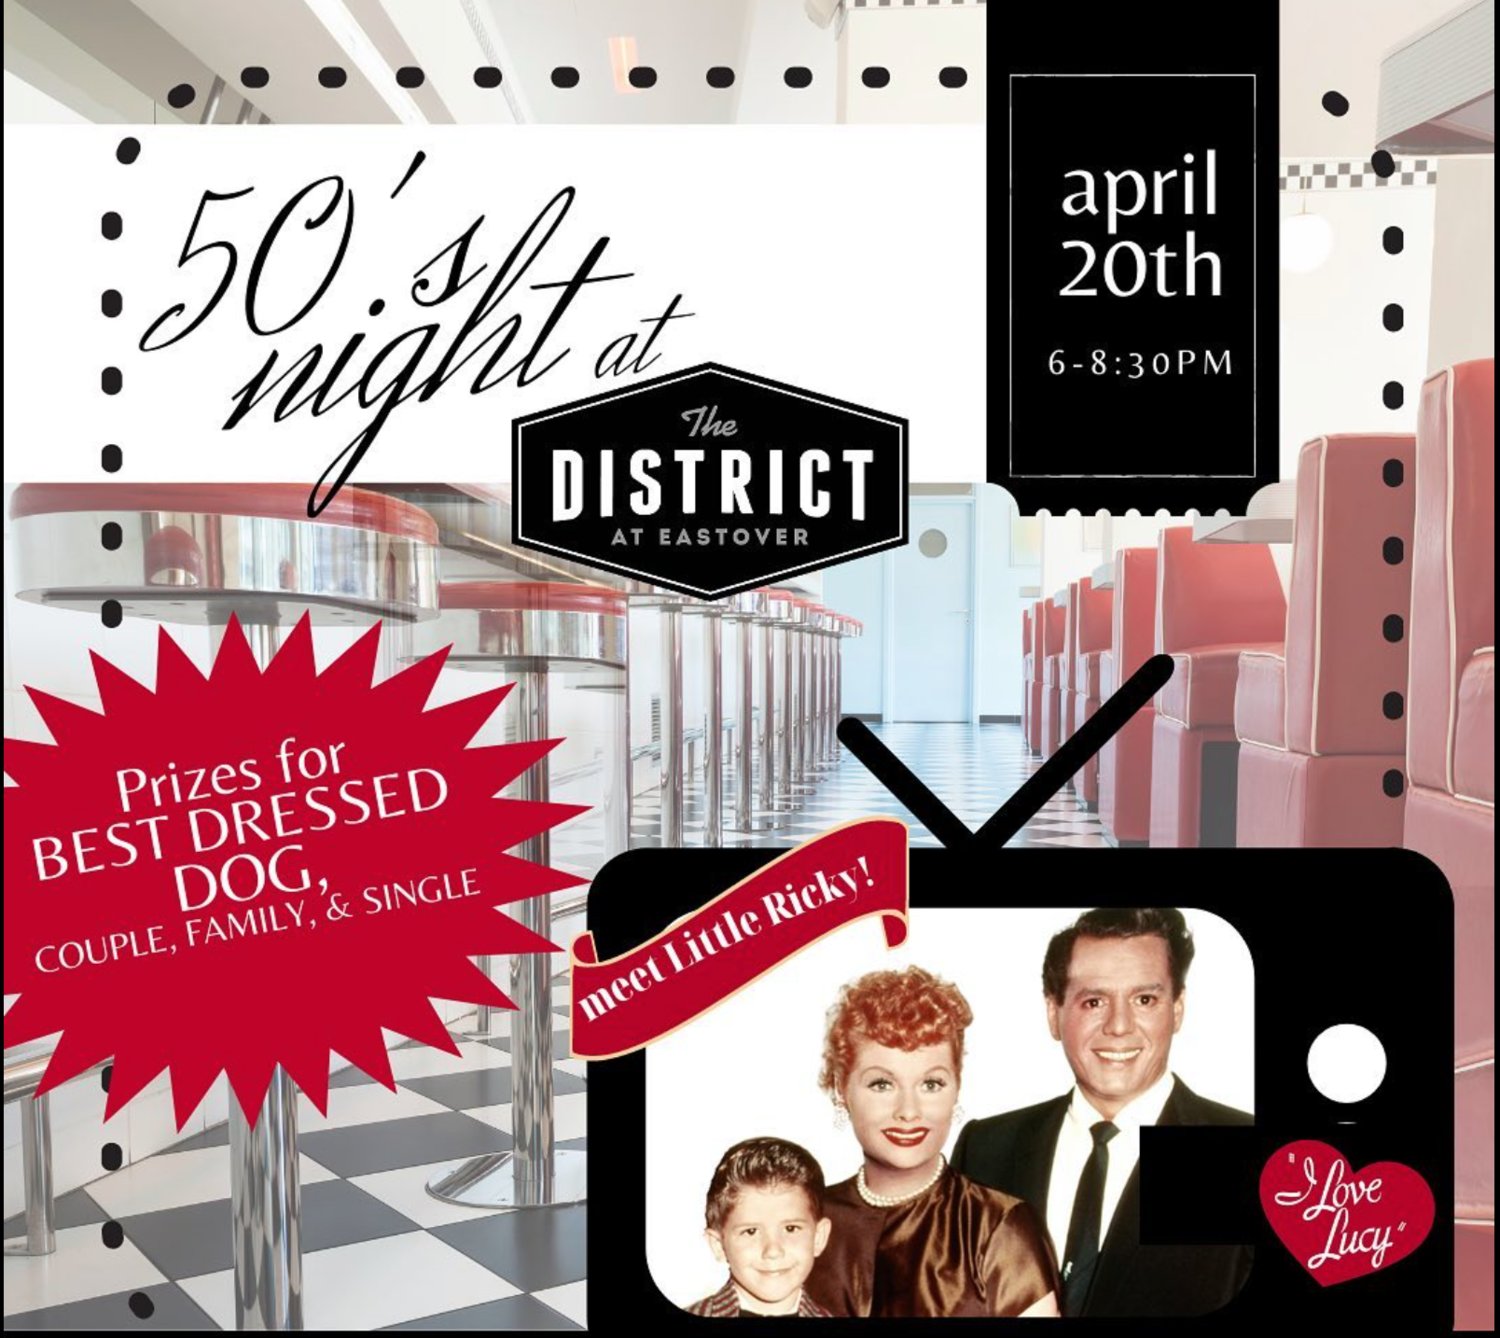 The District's 50's Night of live music, bingo and more